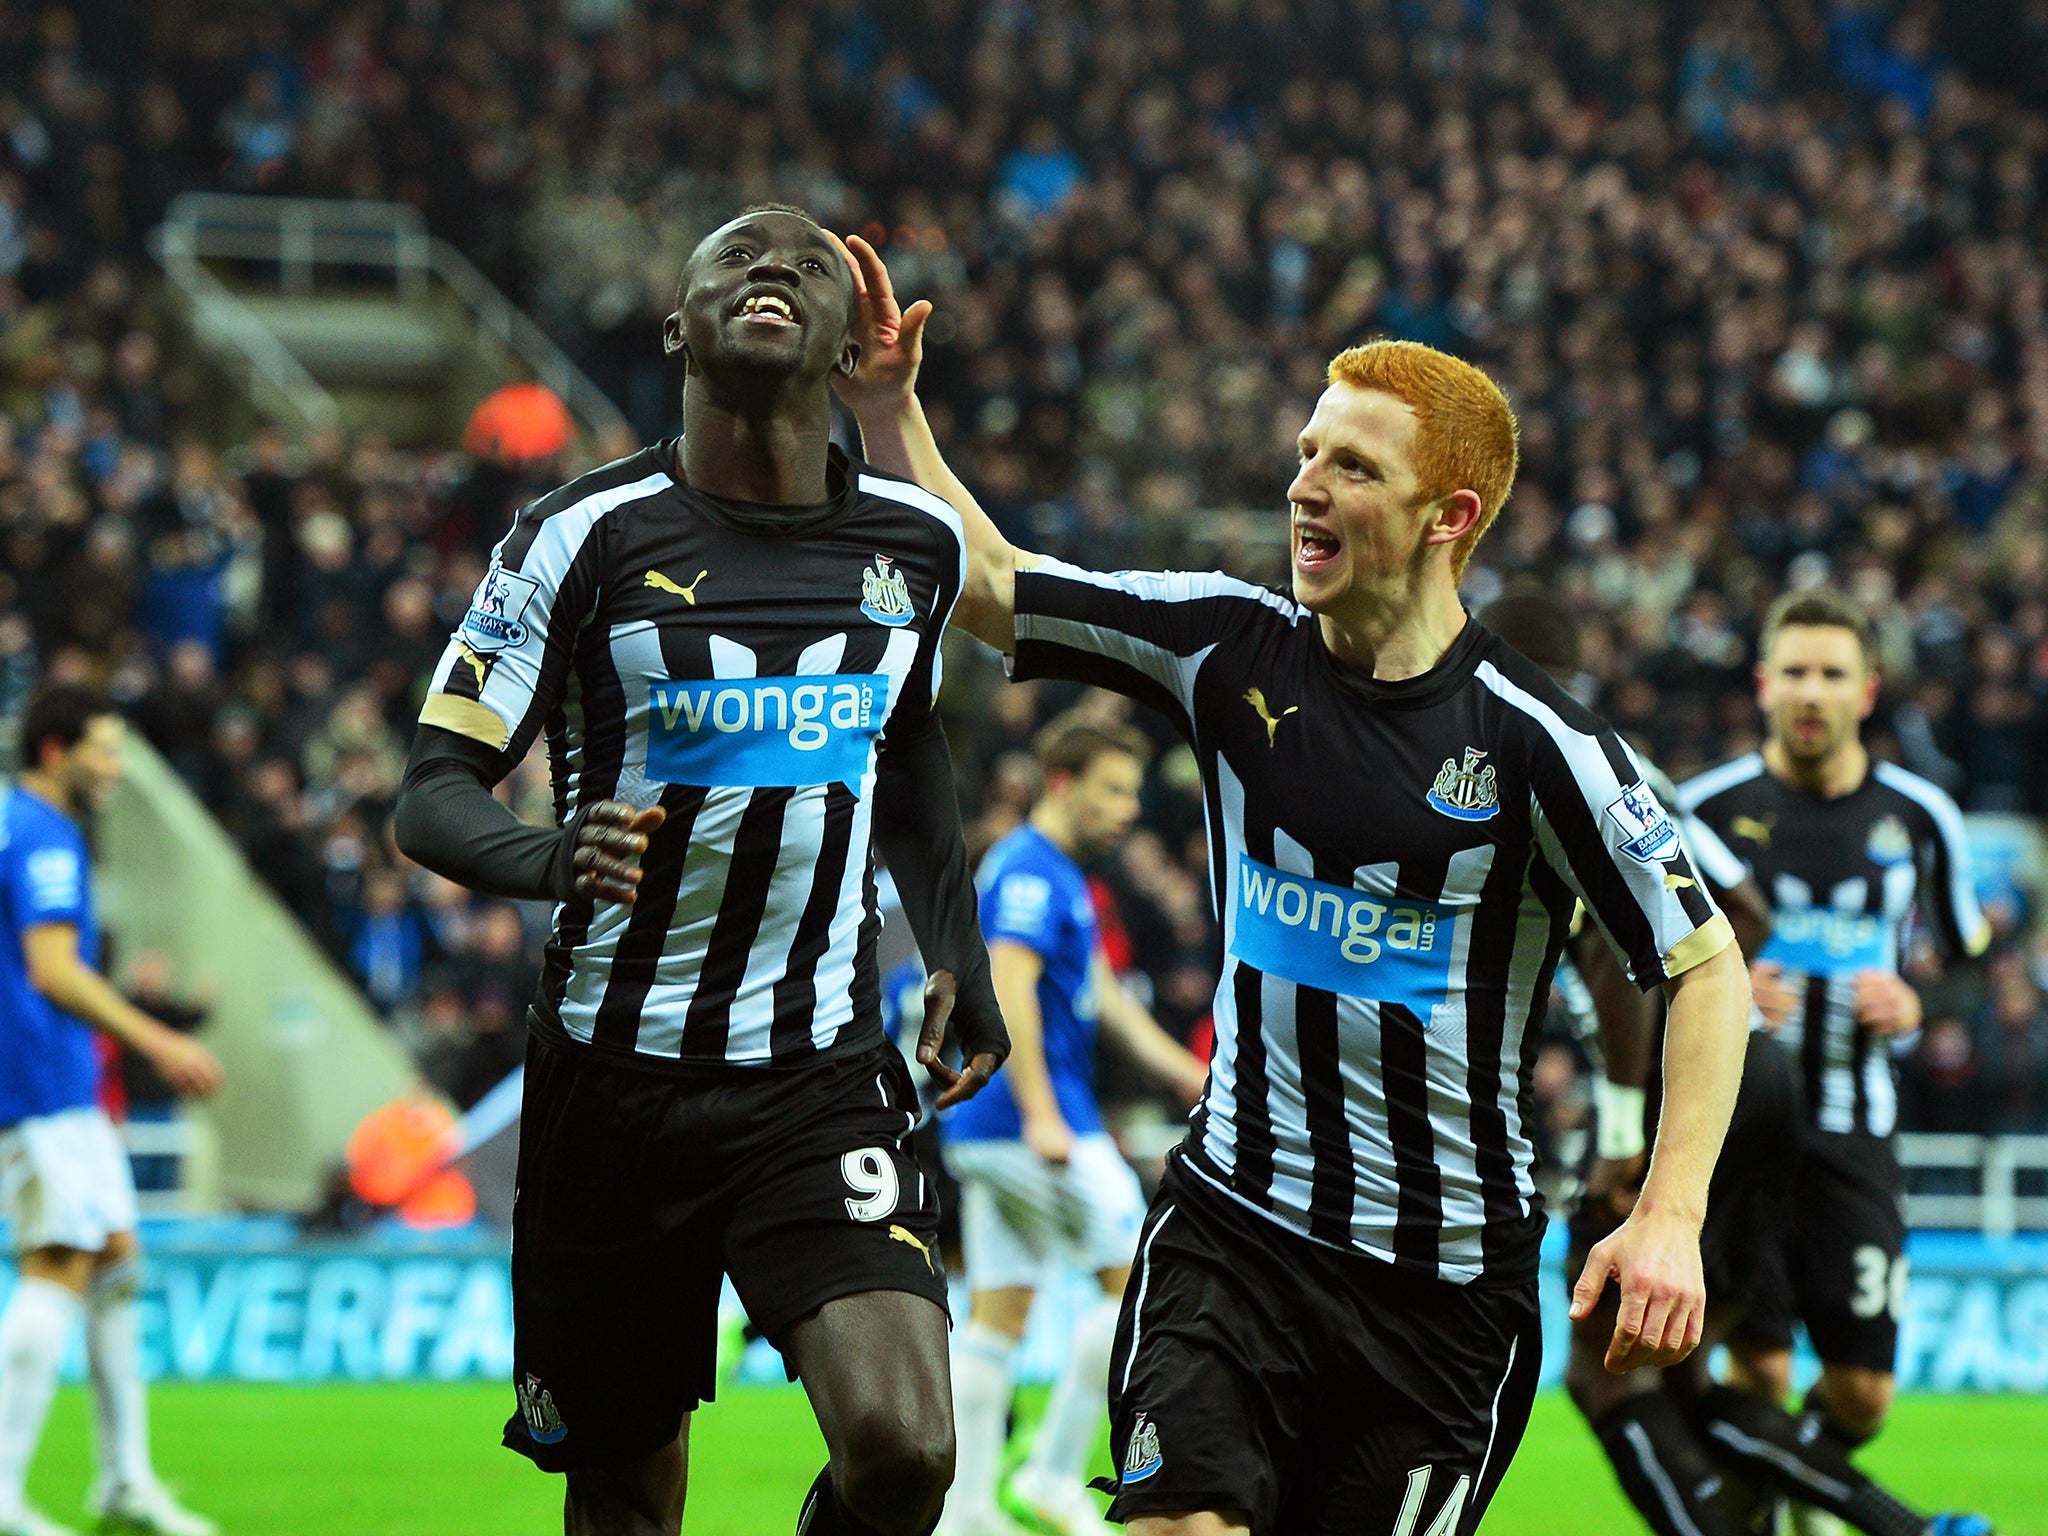 Papiss Demba Cisse of Newcastle United celebrates with team-mate Jack Colback after scoring against Everton